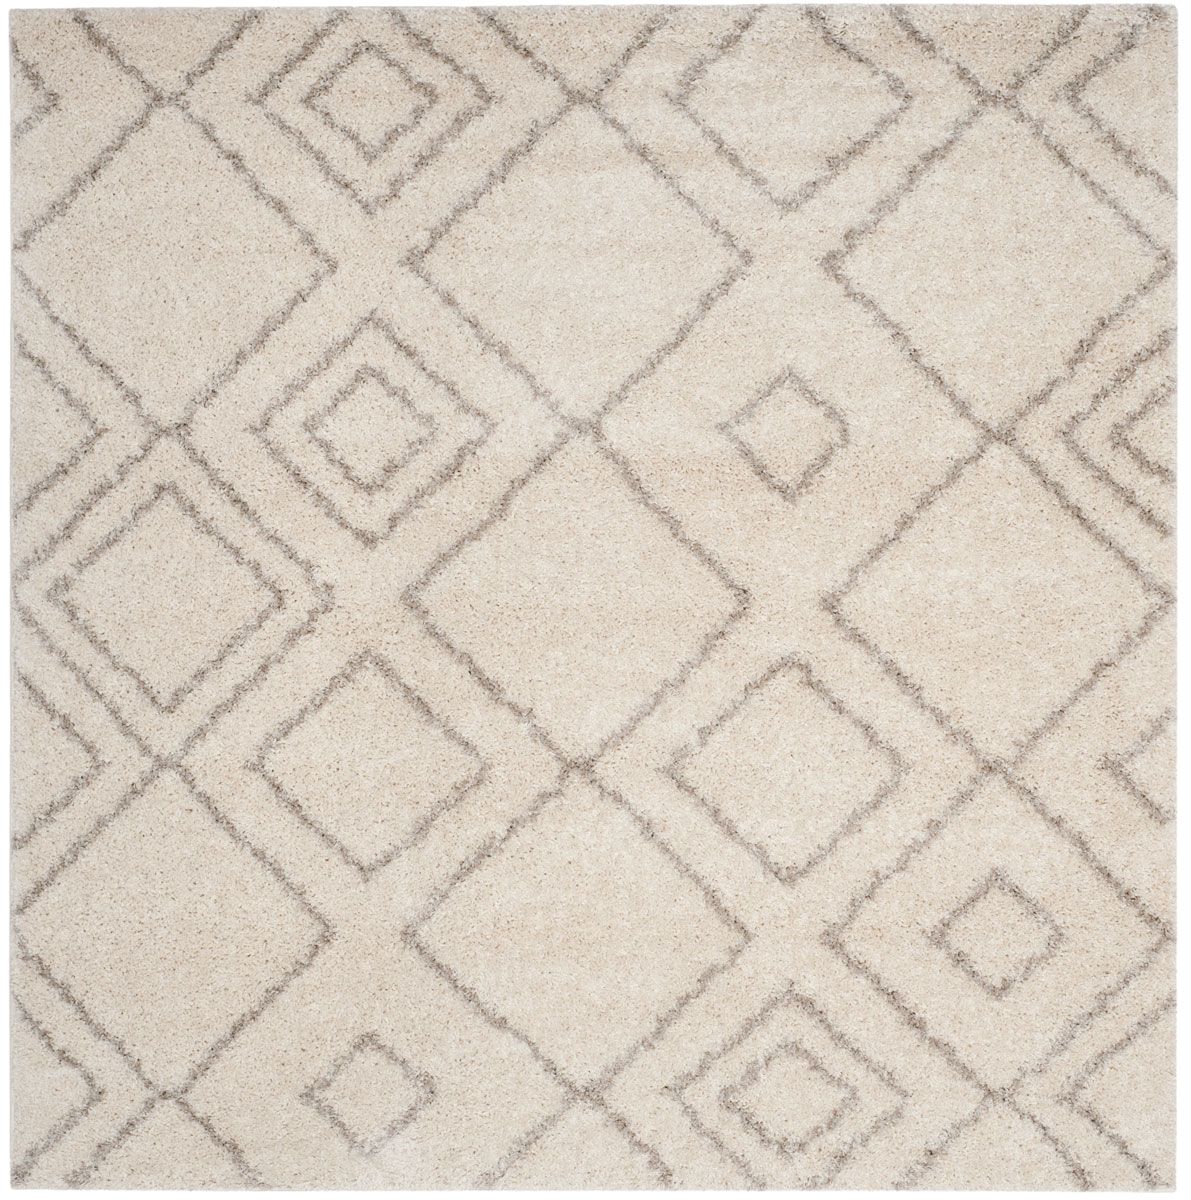 Asg744a-7sq Arizona Shag Power Loomed Square Area Rug, Ivory & Beige - 6 Ft.-7 In. X 6 Ft.-7 In.